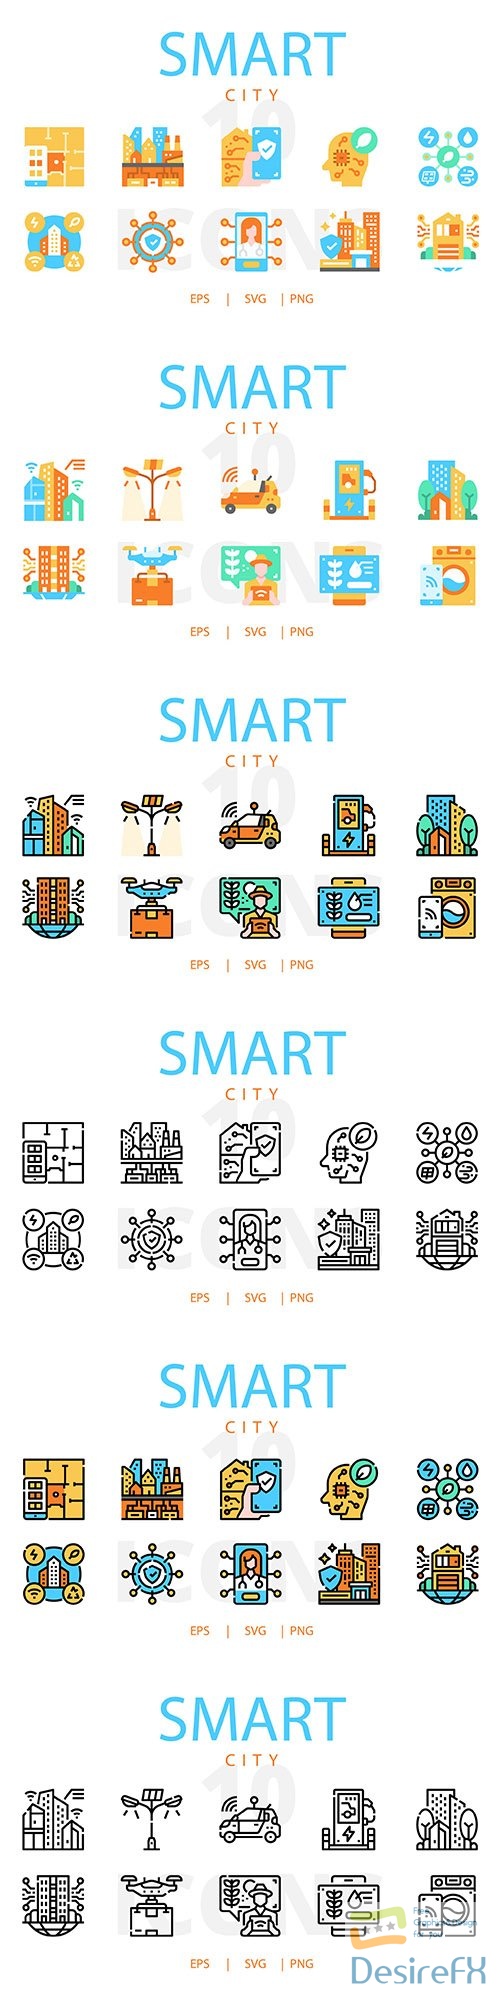 Smart City Vector Icons Collection